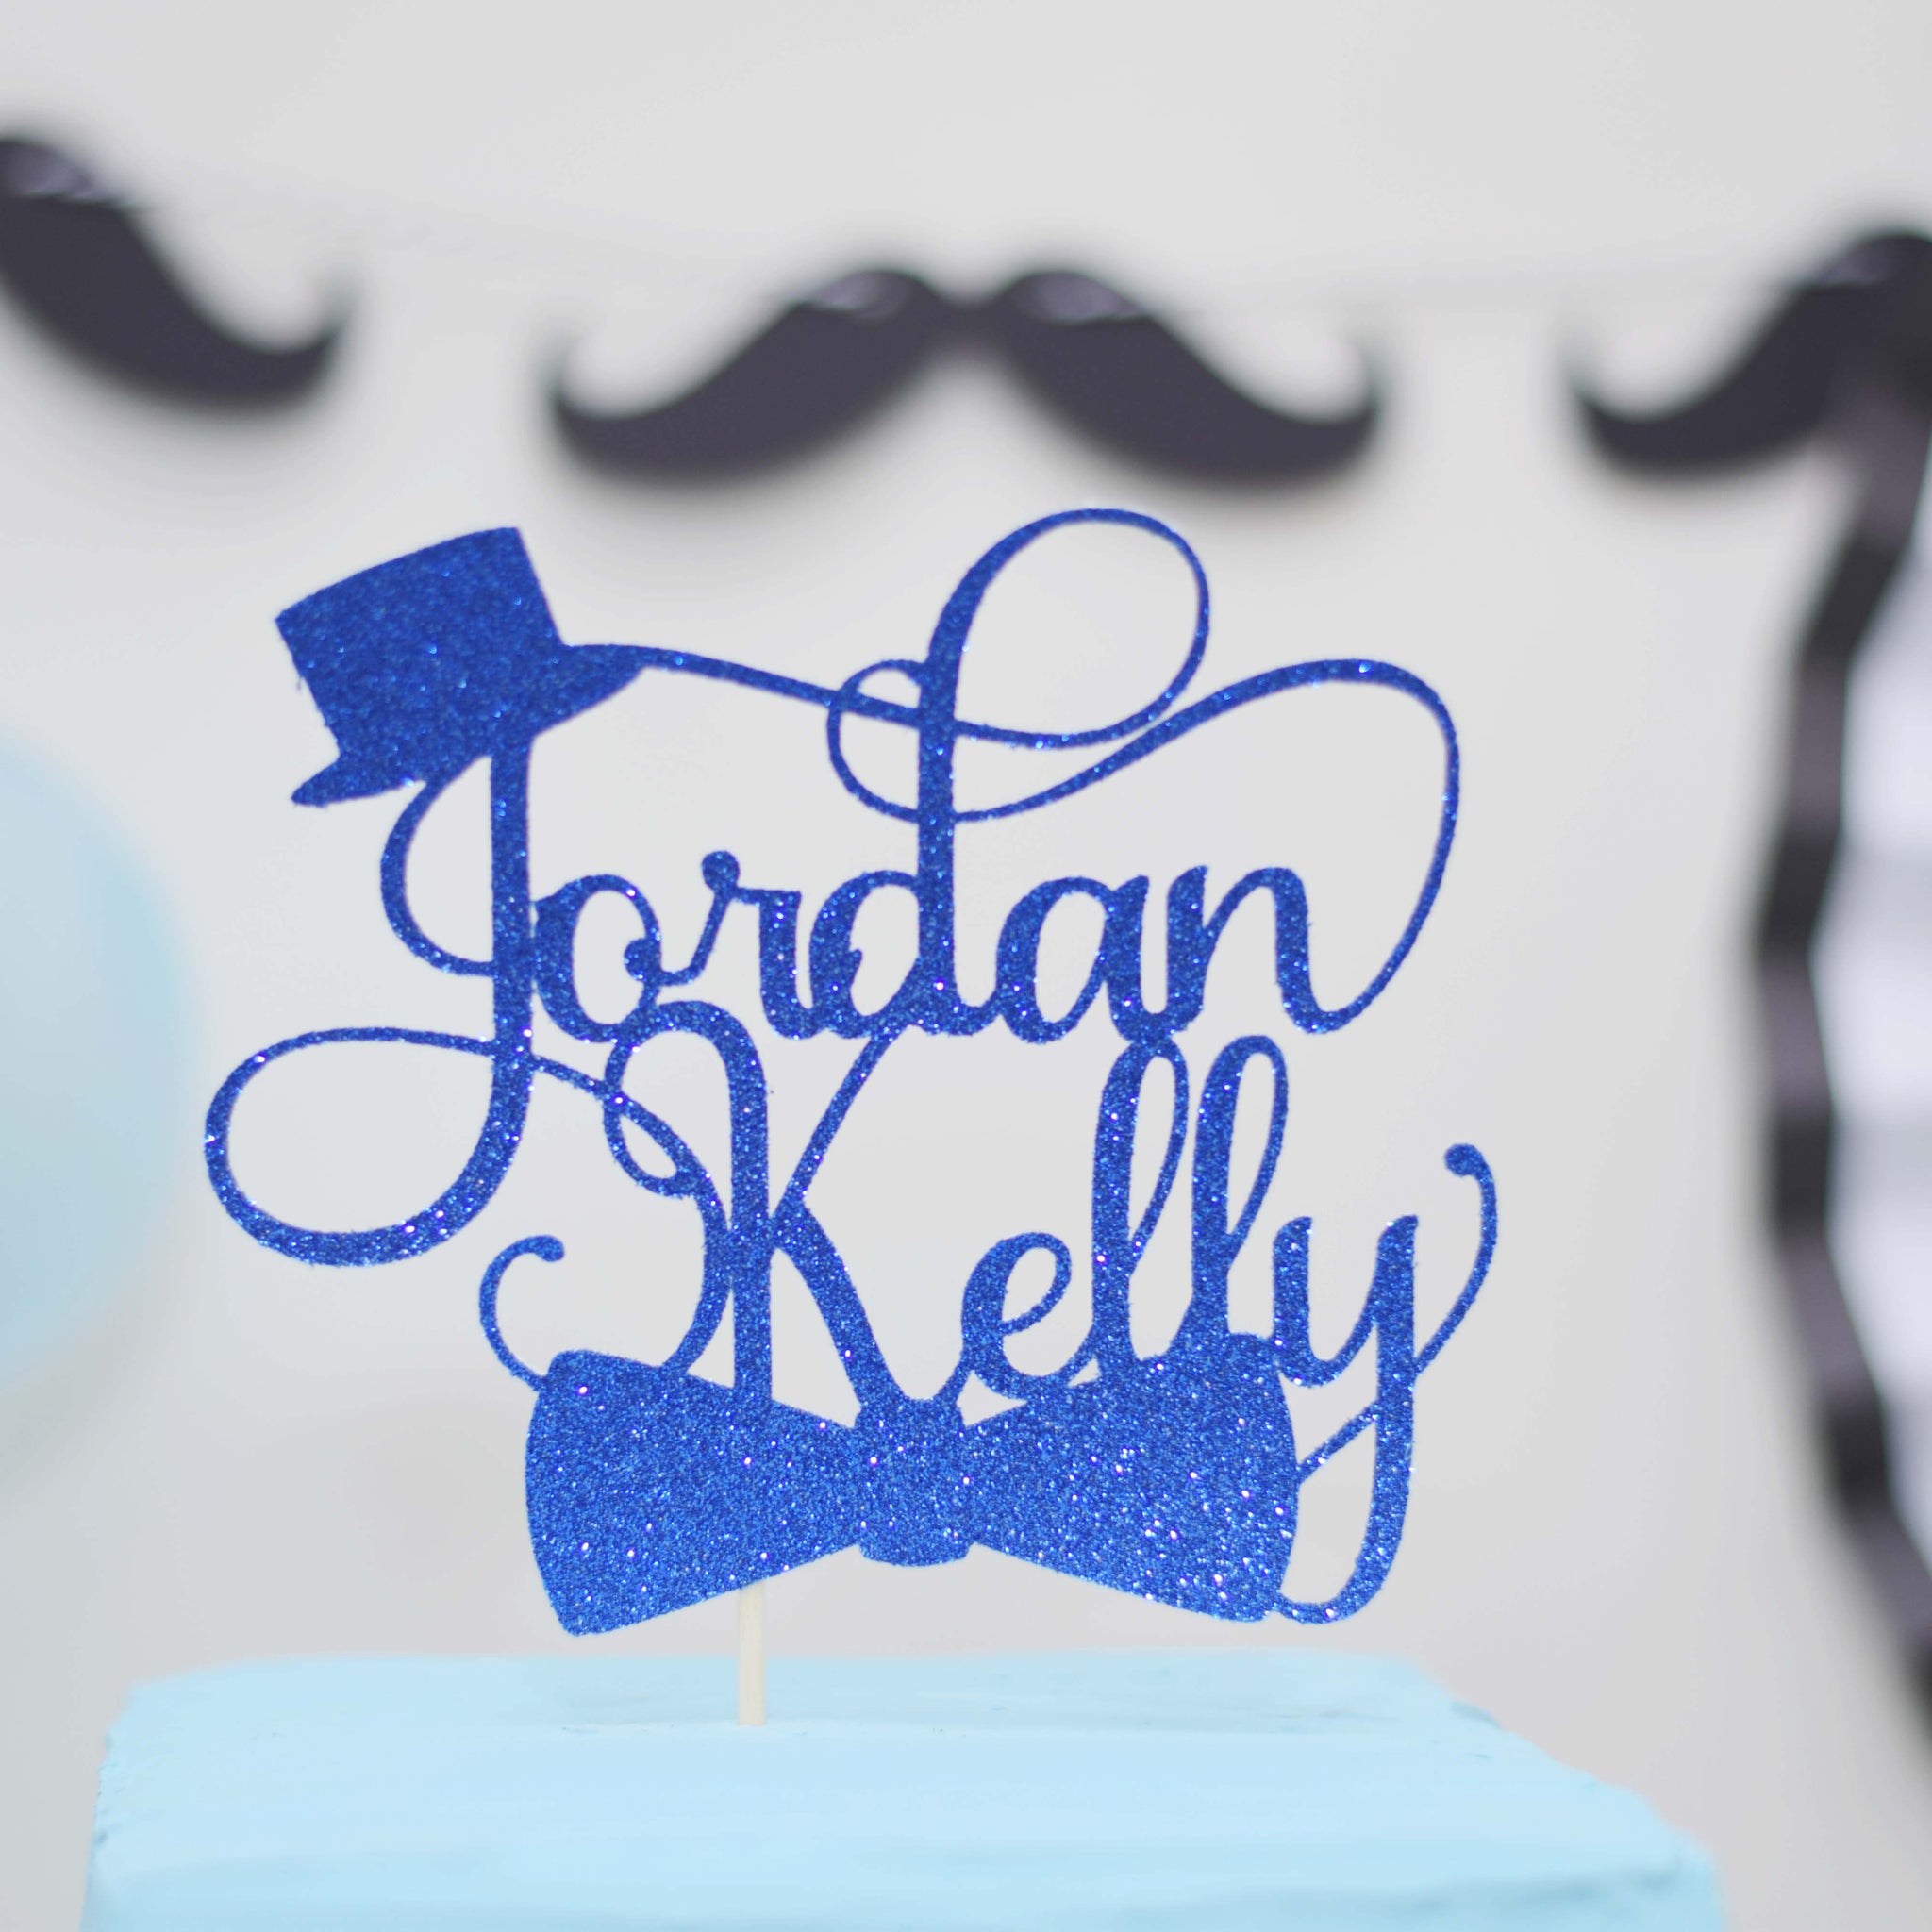 Dicky Bow Tie Shaped Cake Toppers – SuperCoolCreations